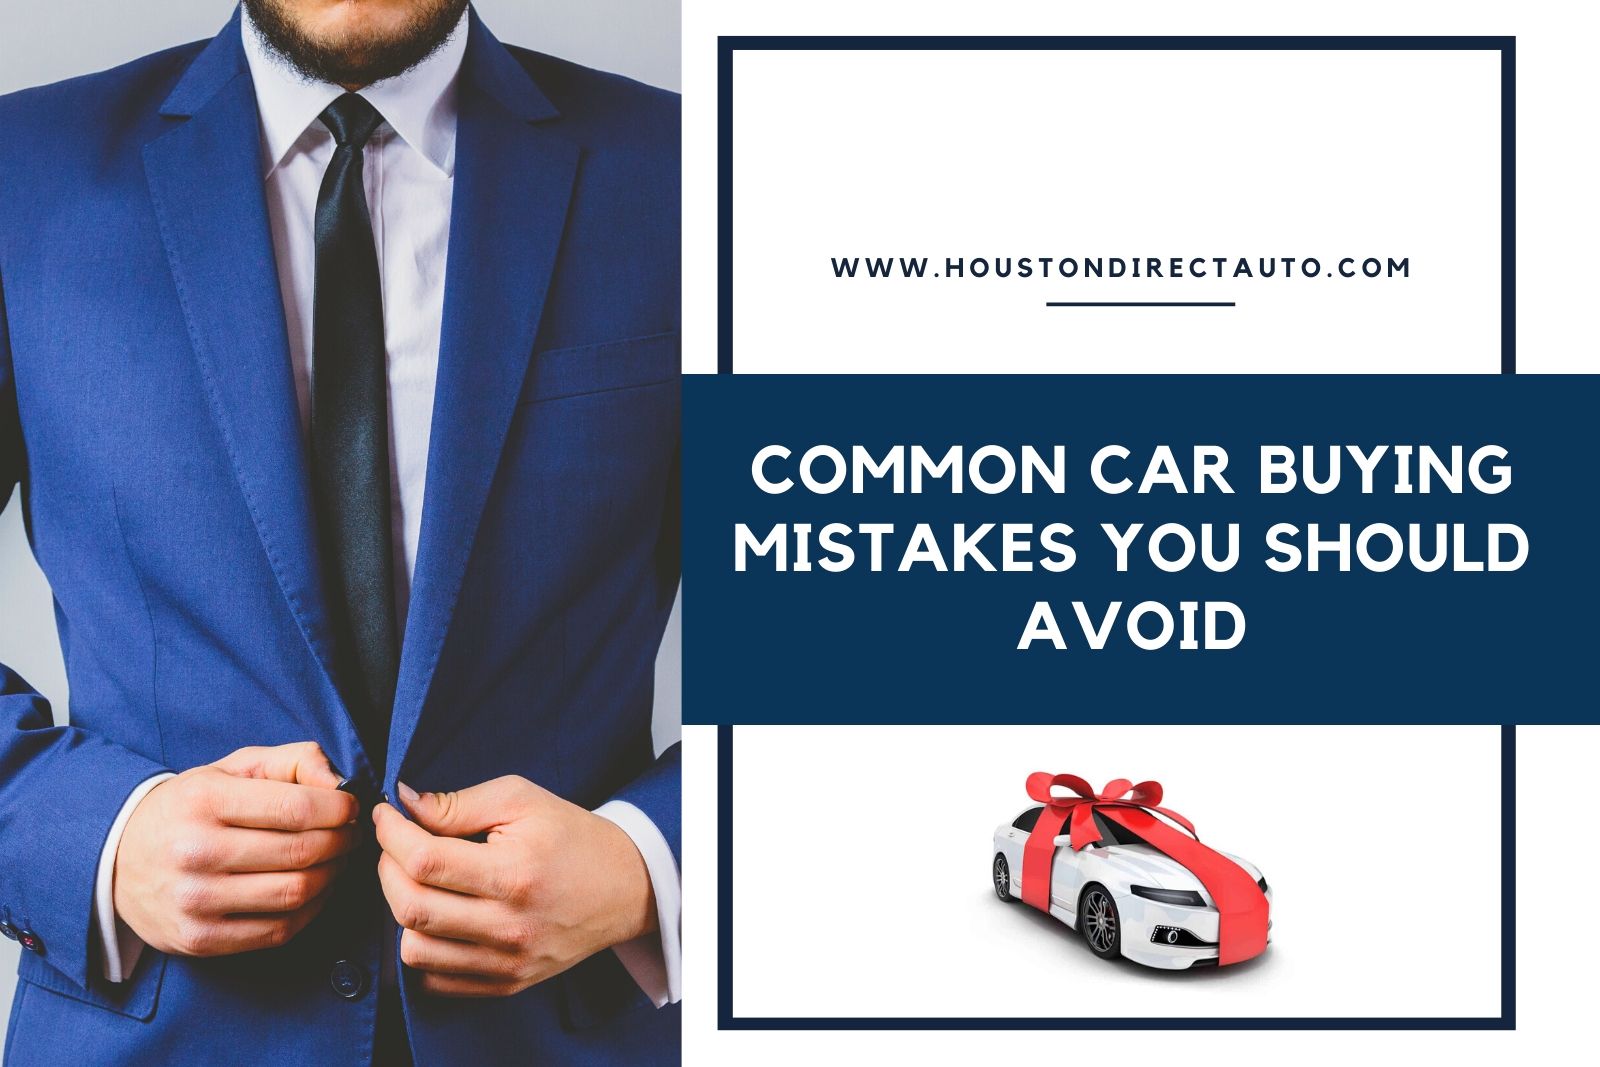 5 Most Common Car Buying Mistakes You Should Avoid